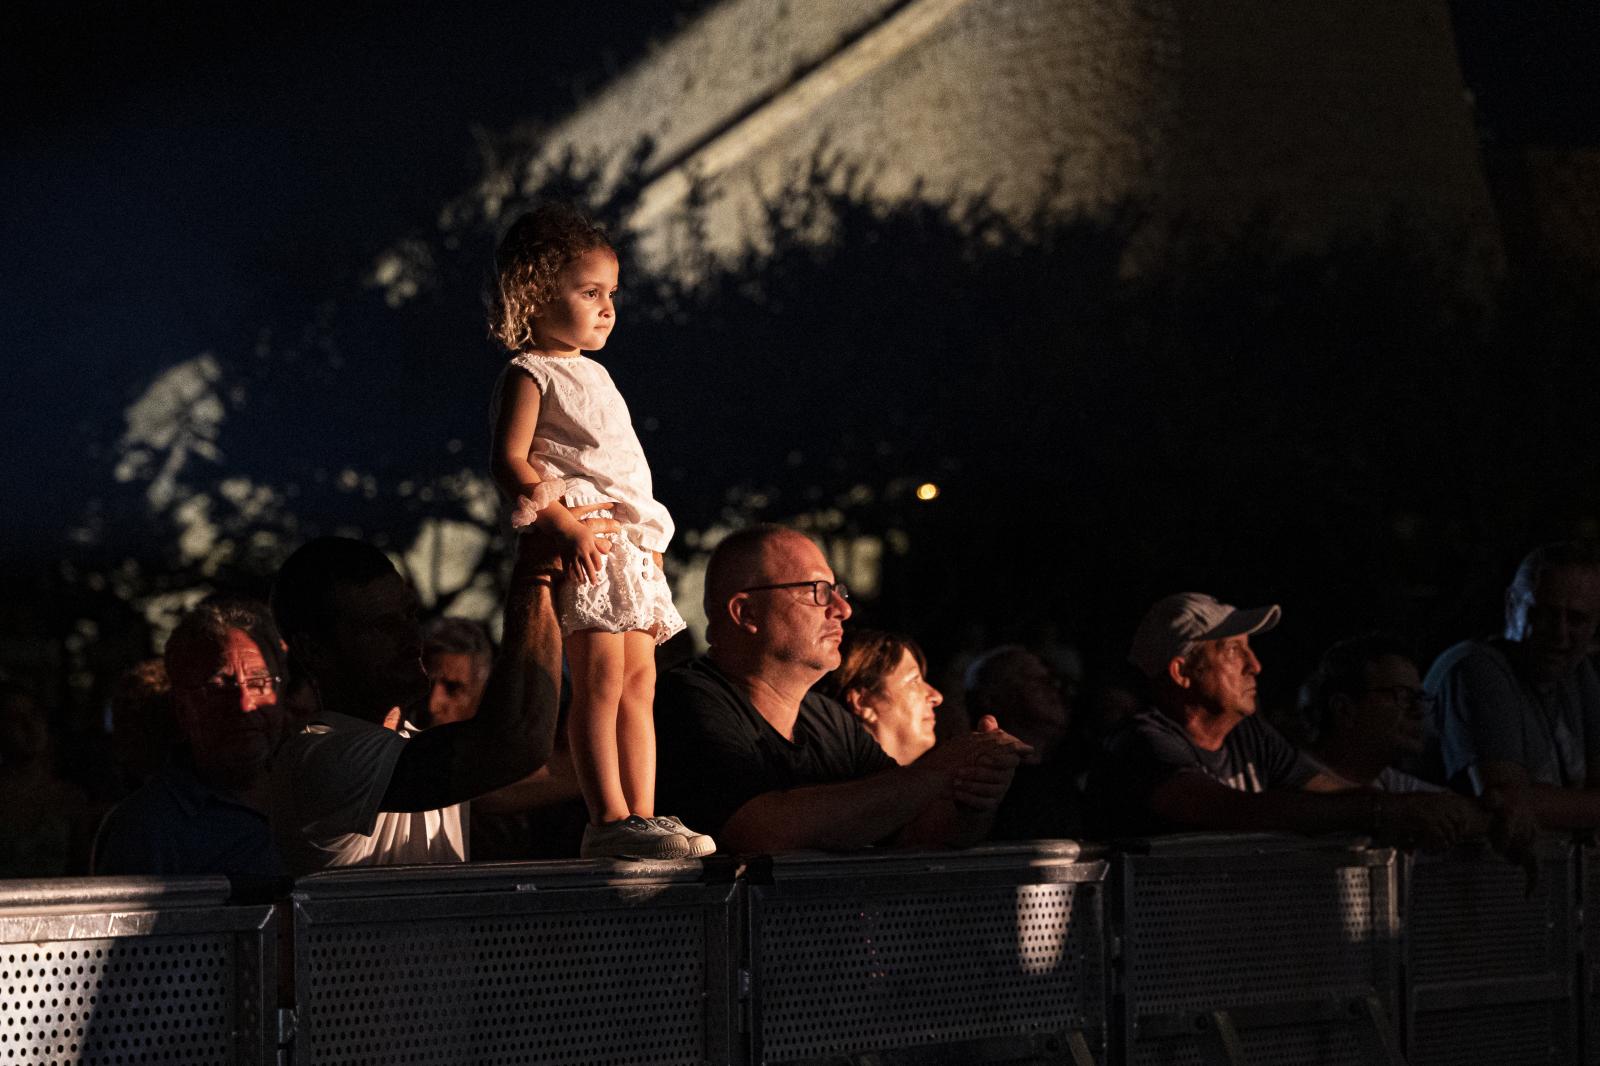 Image from Daily News - A little girl is watching Los Rebeldes' concert...